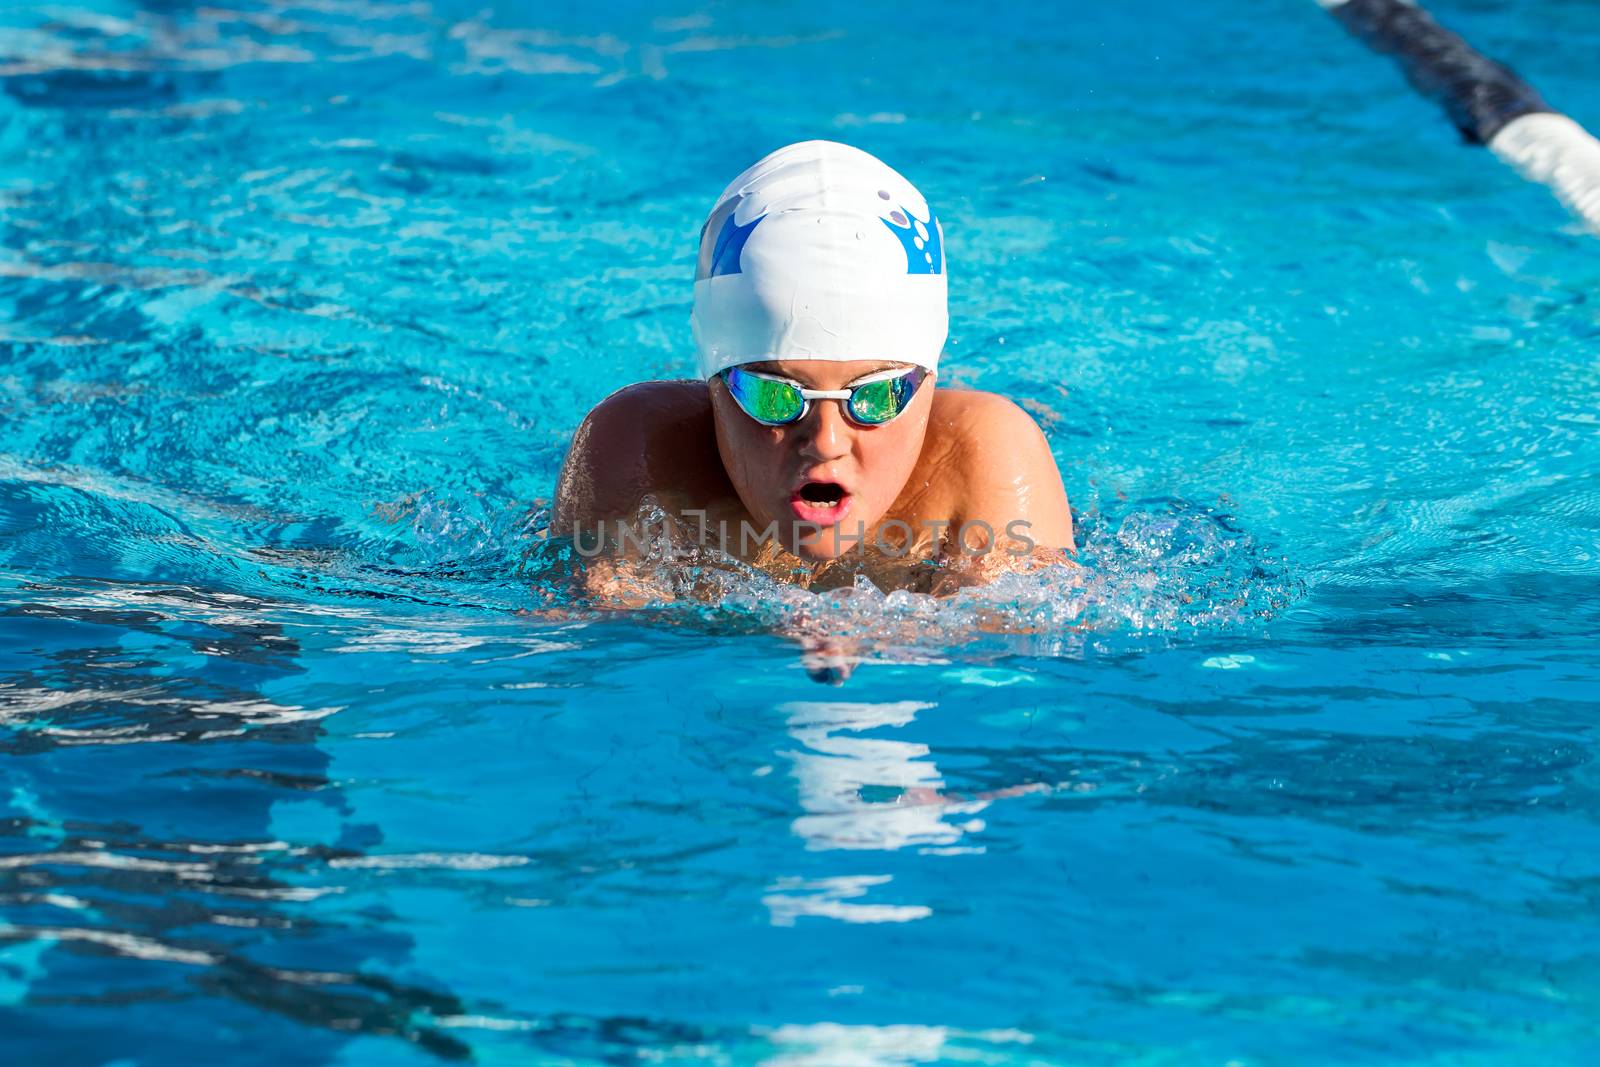 Close up action shot of young teen boy practicing breaststroke in swimming pool.